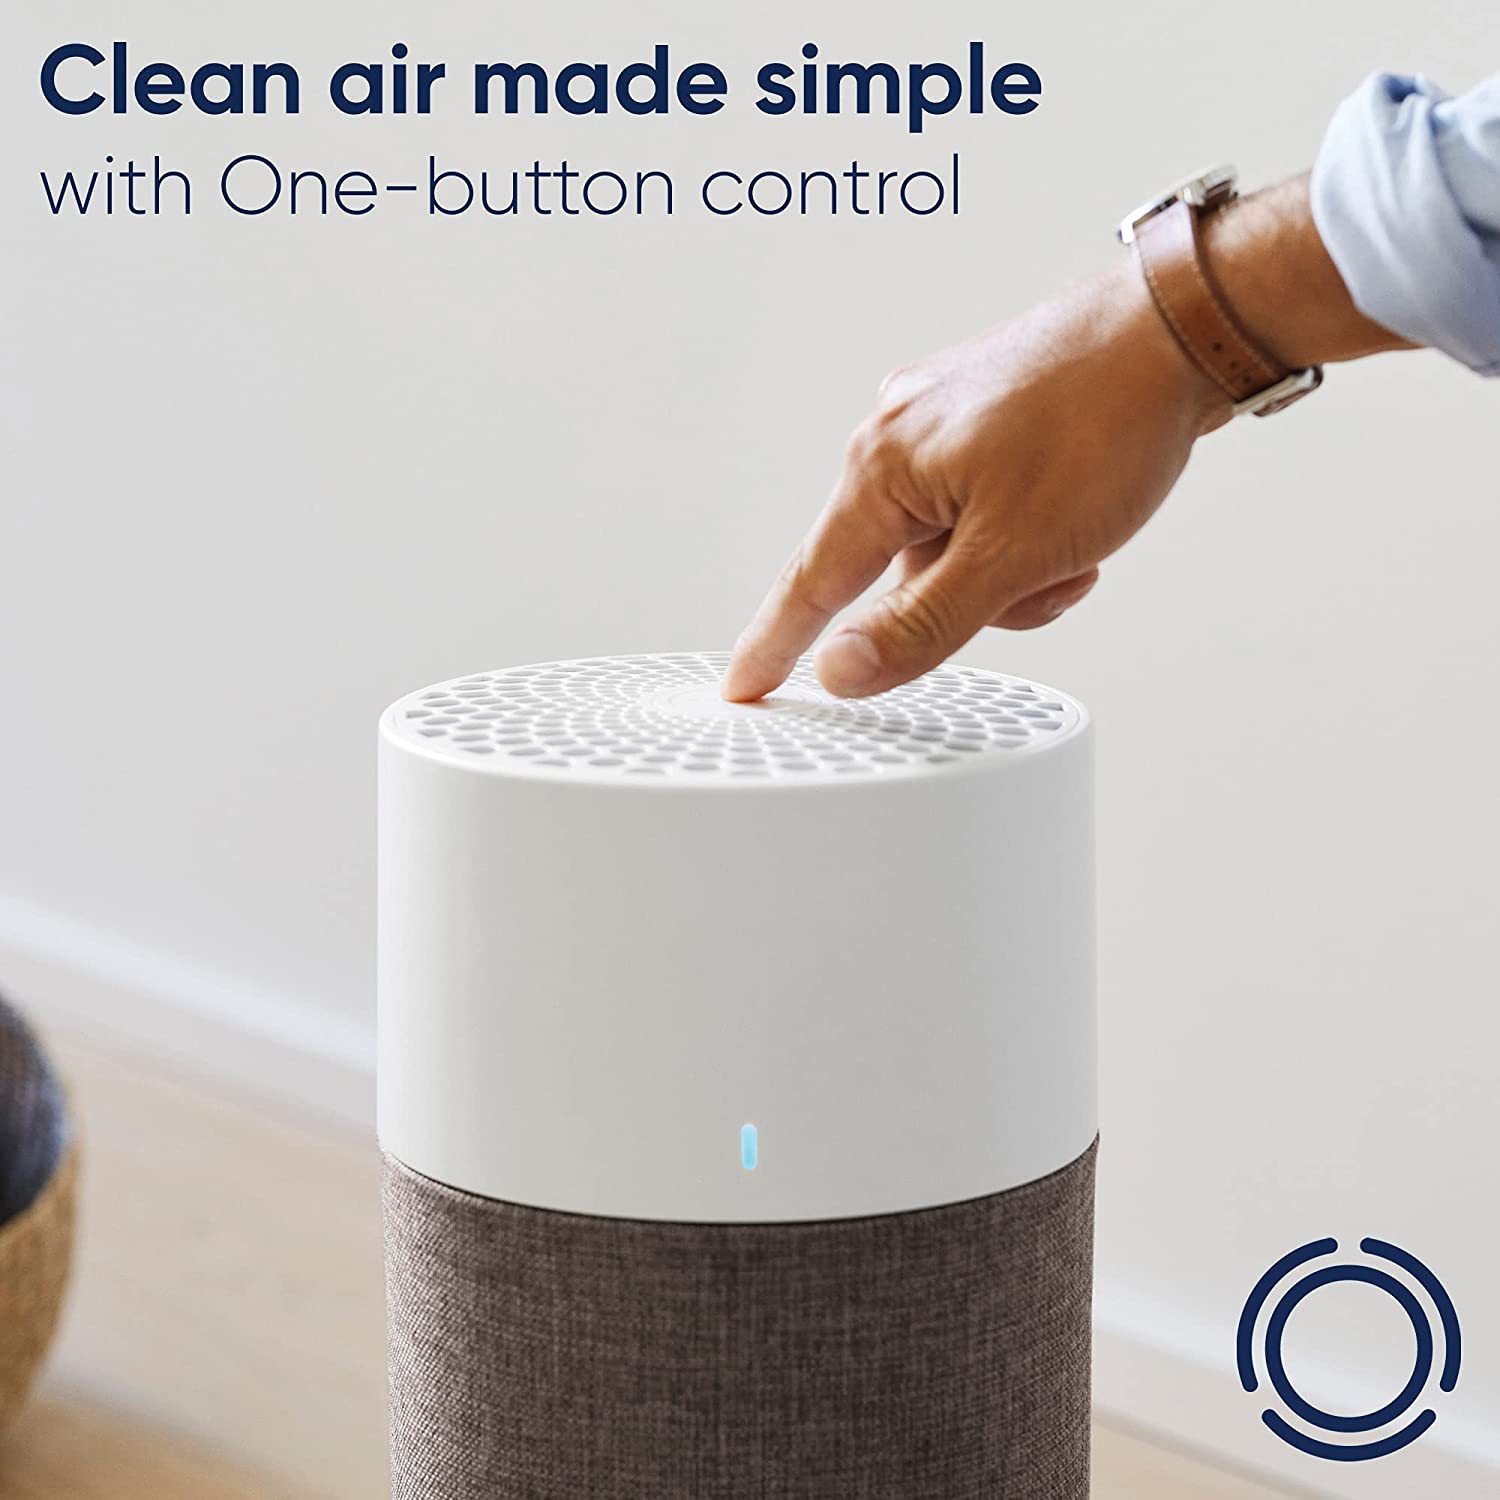 Blueair - Blue 3410 Air Purifier 36m2 | Kills germs and removes allergens, dust, and molds